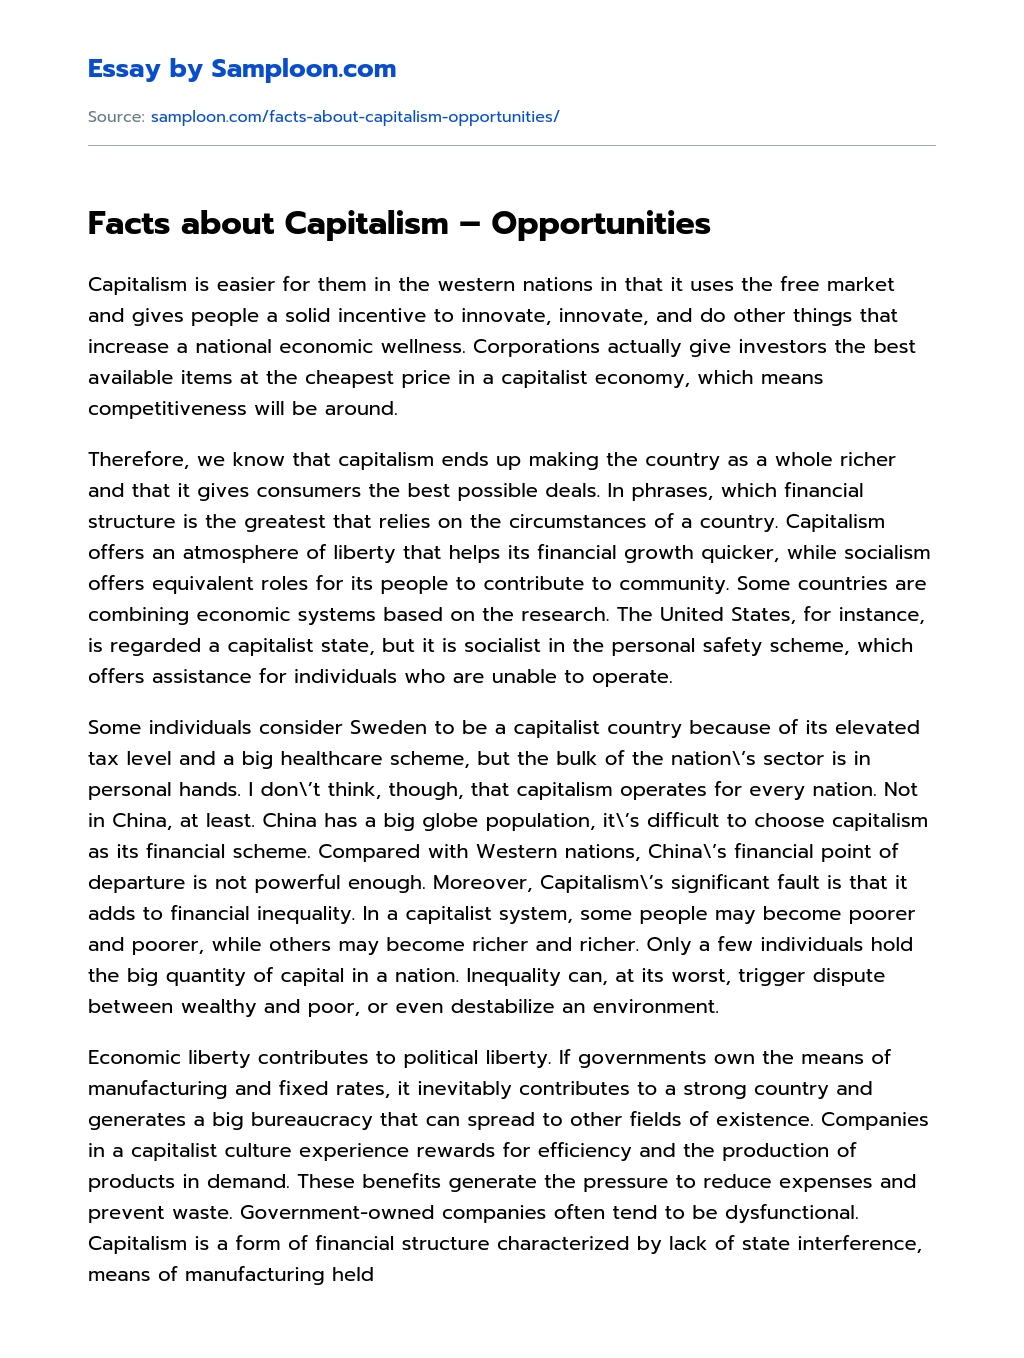 Facts about Capitalism – Opportunities essay